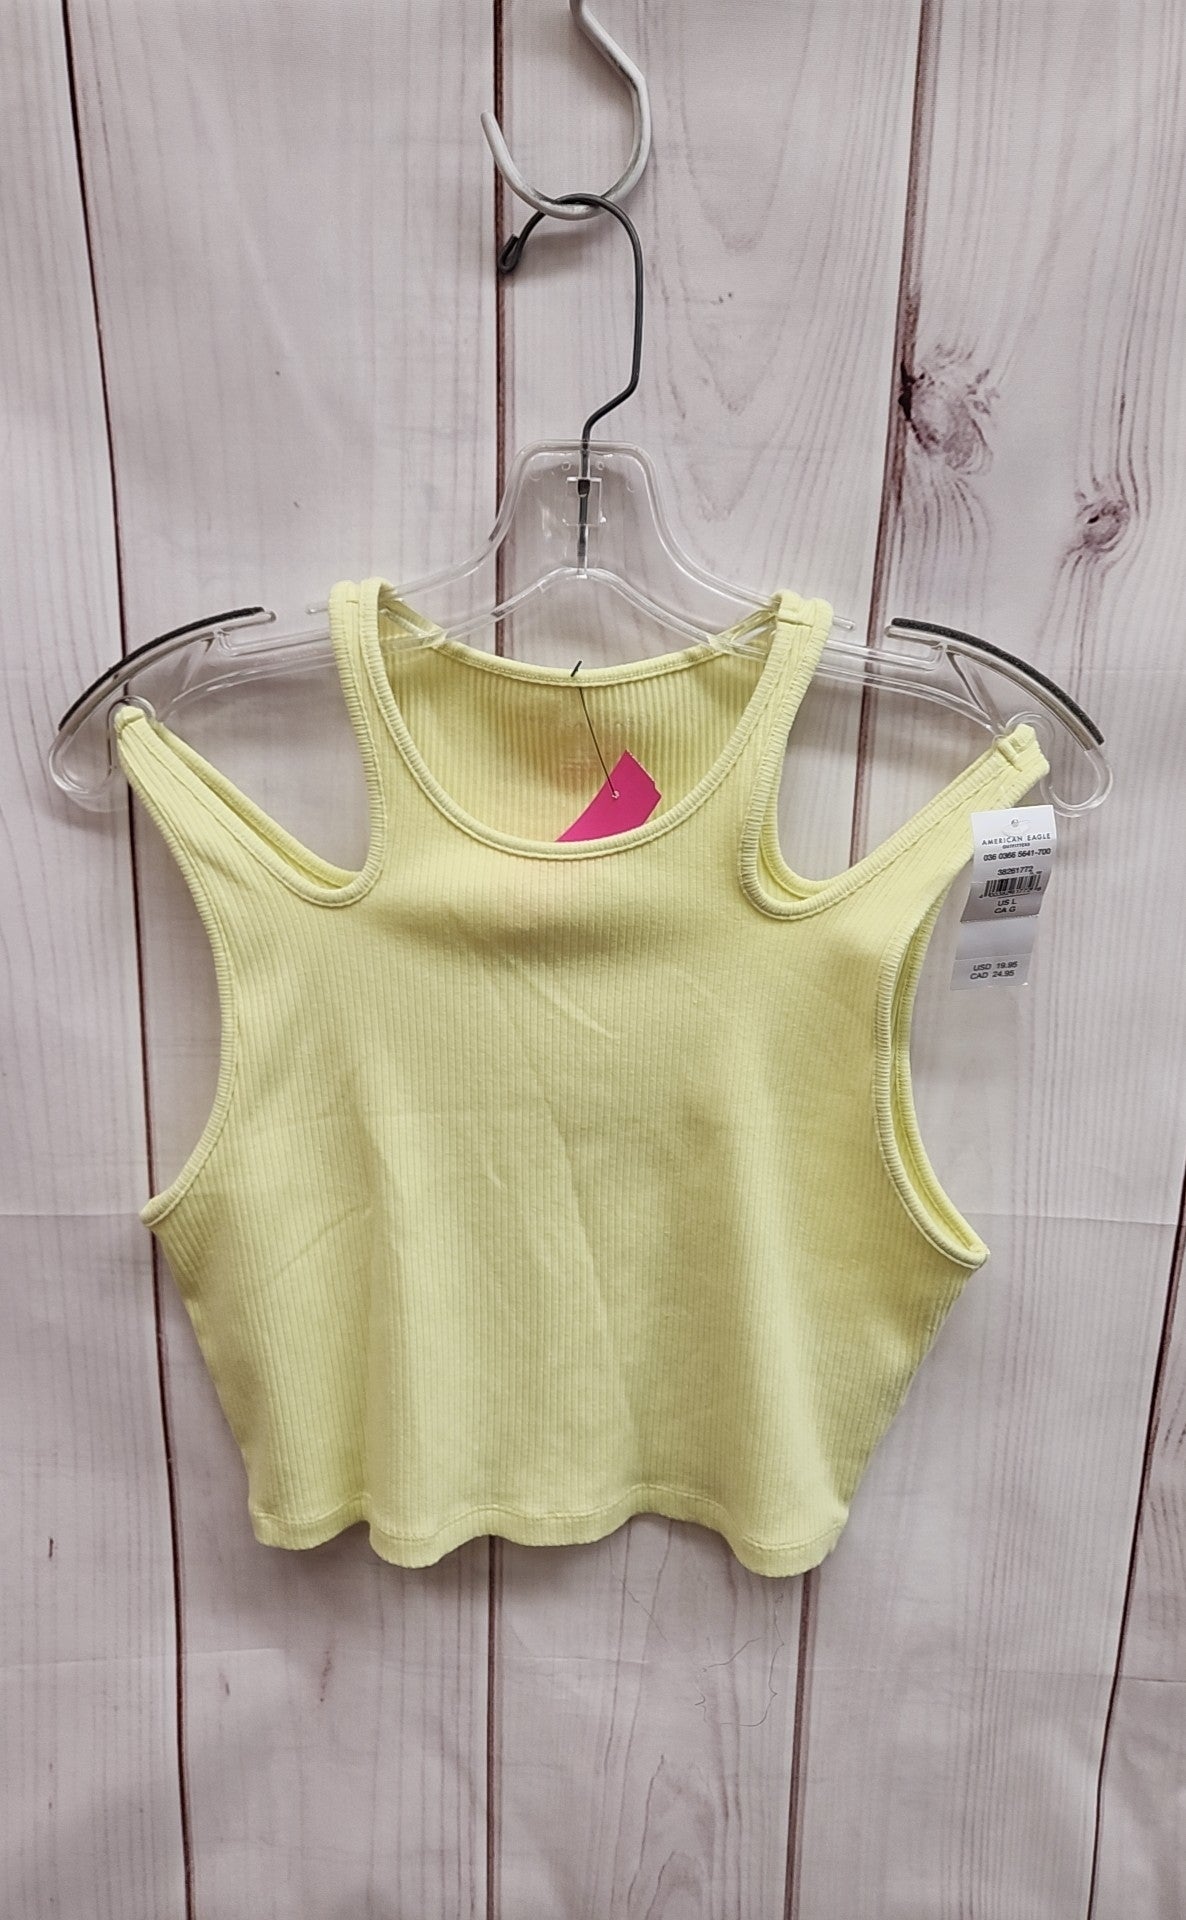 American Eagle Women's Size L Yellow Sleeveless Top NWT